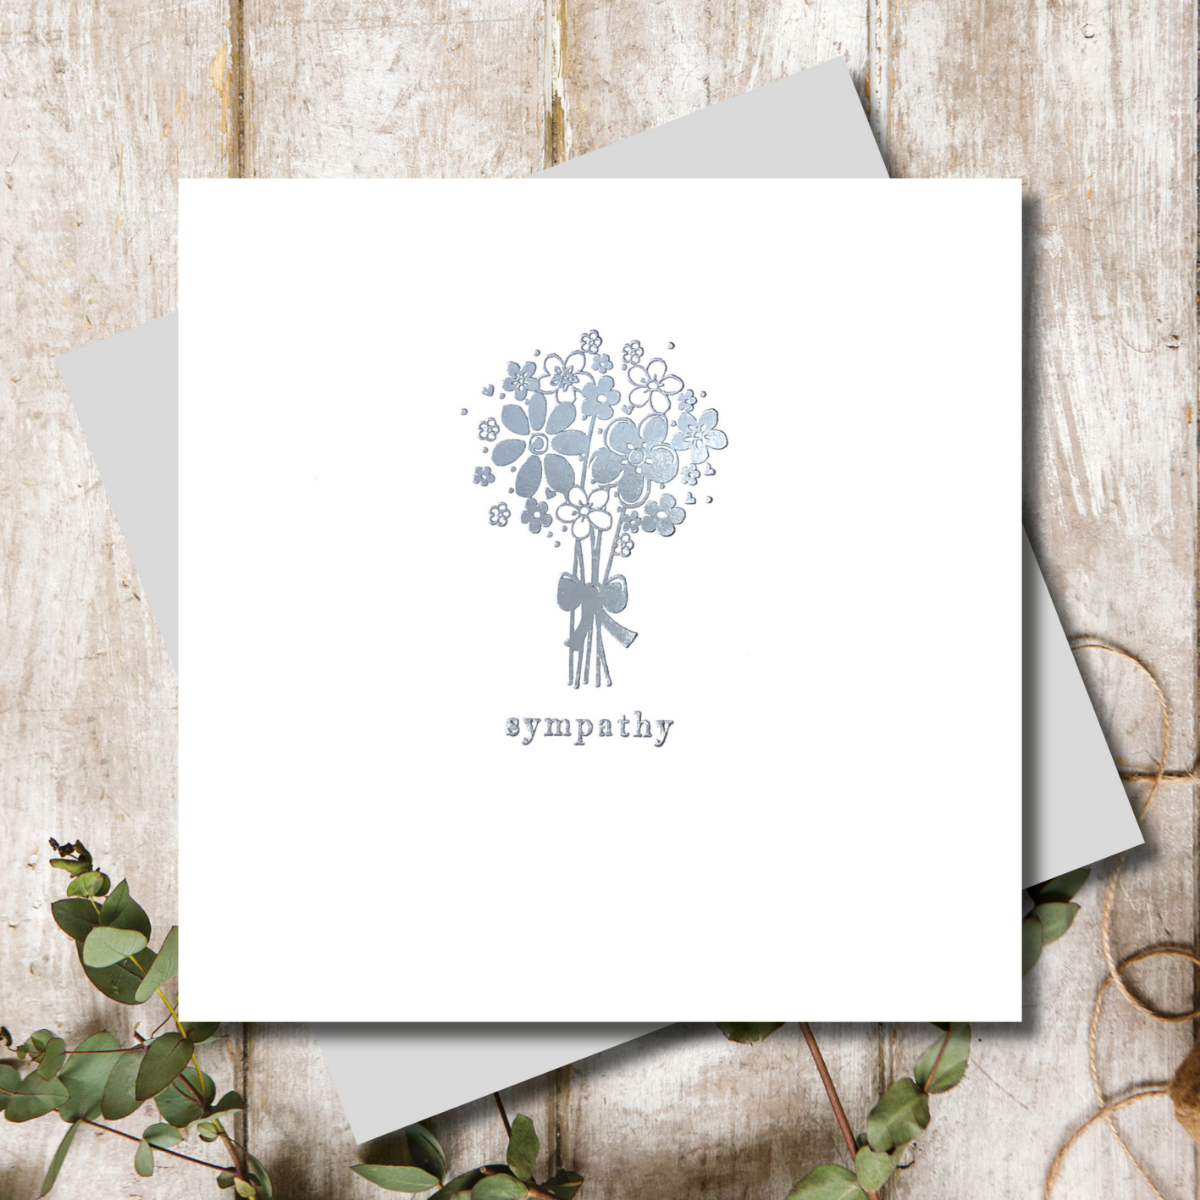 Sympathy Bunch of Flowers Greeting Card